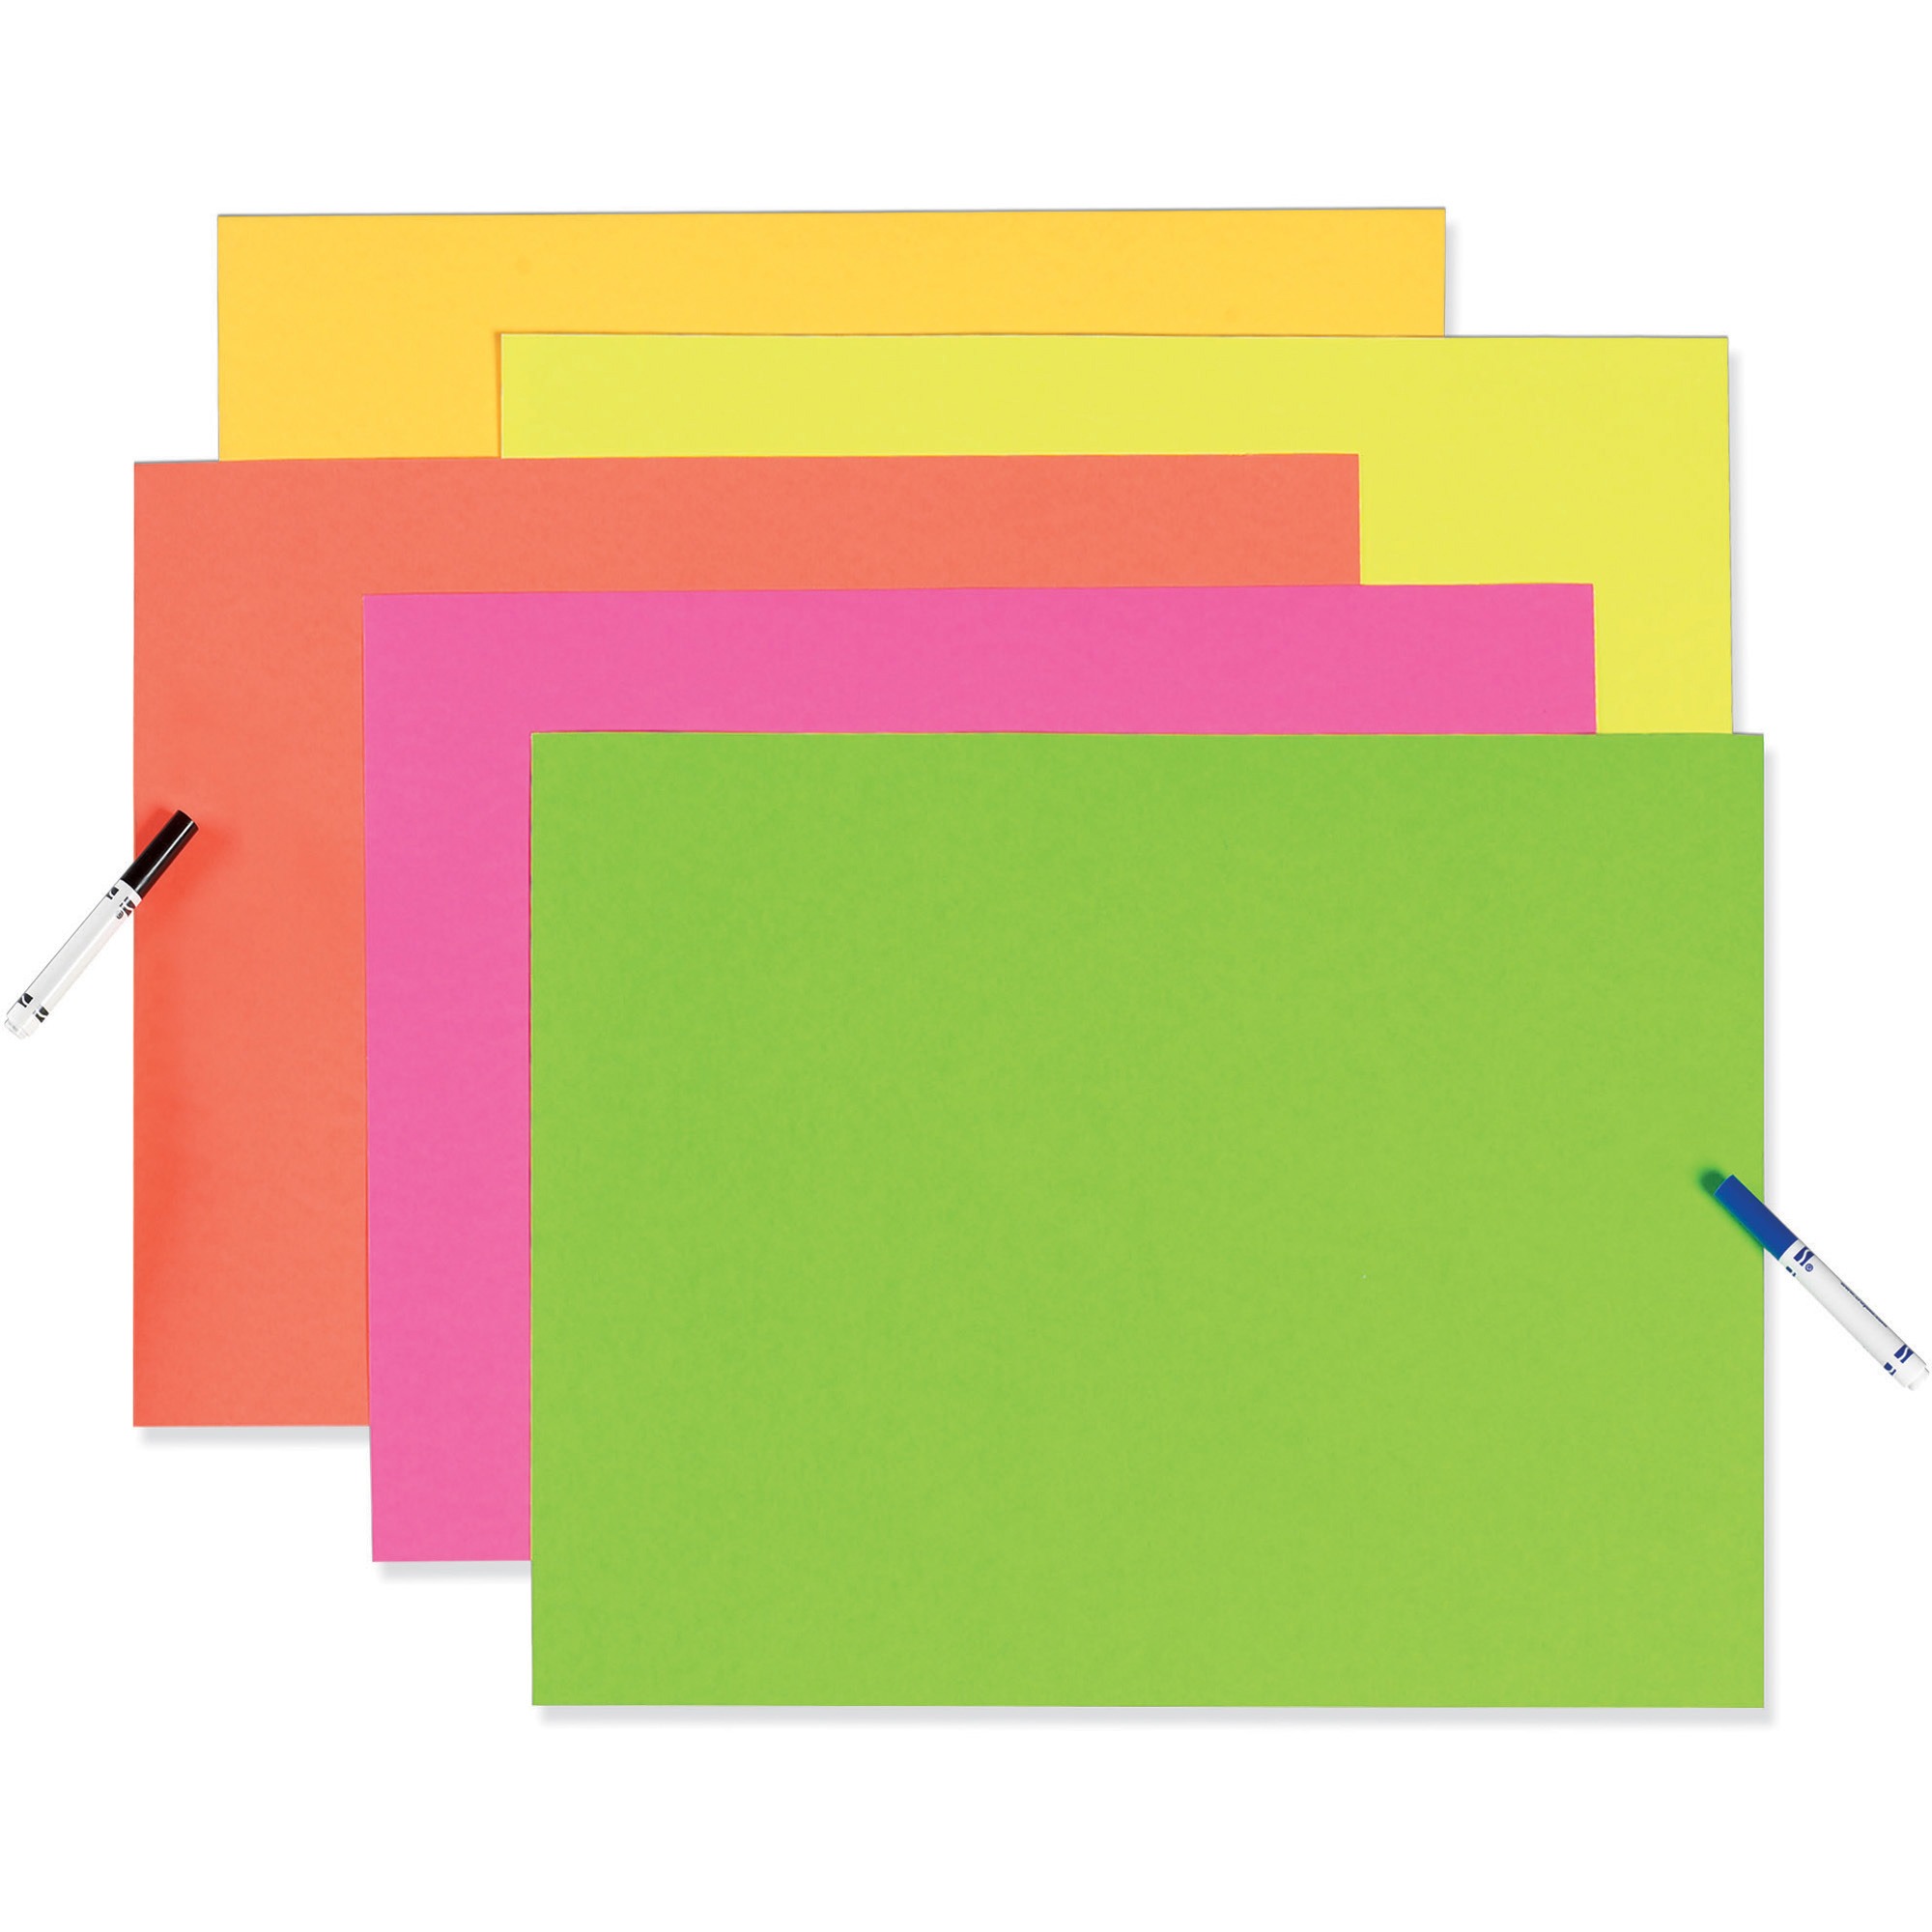 PaconÂ® Neon Poster Board, 22" x 28", Assorted Neon Colors, 25 Sheets - image 1 of 5